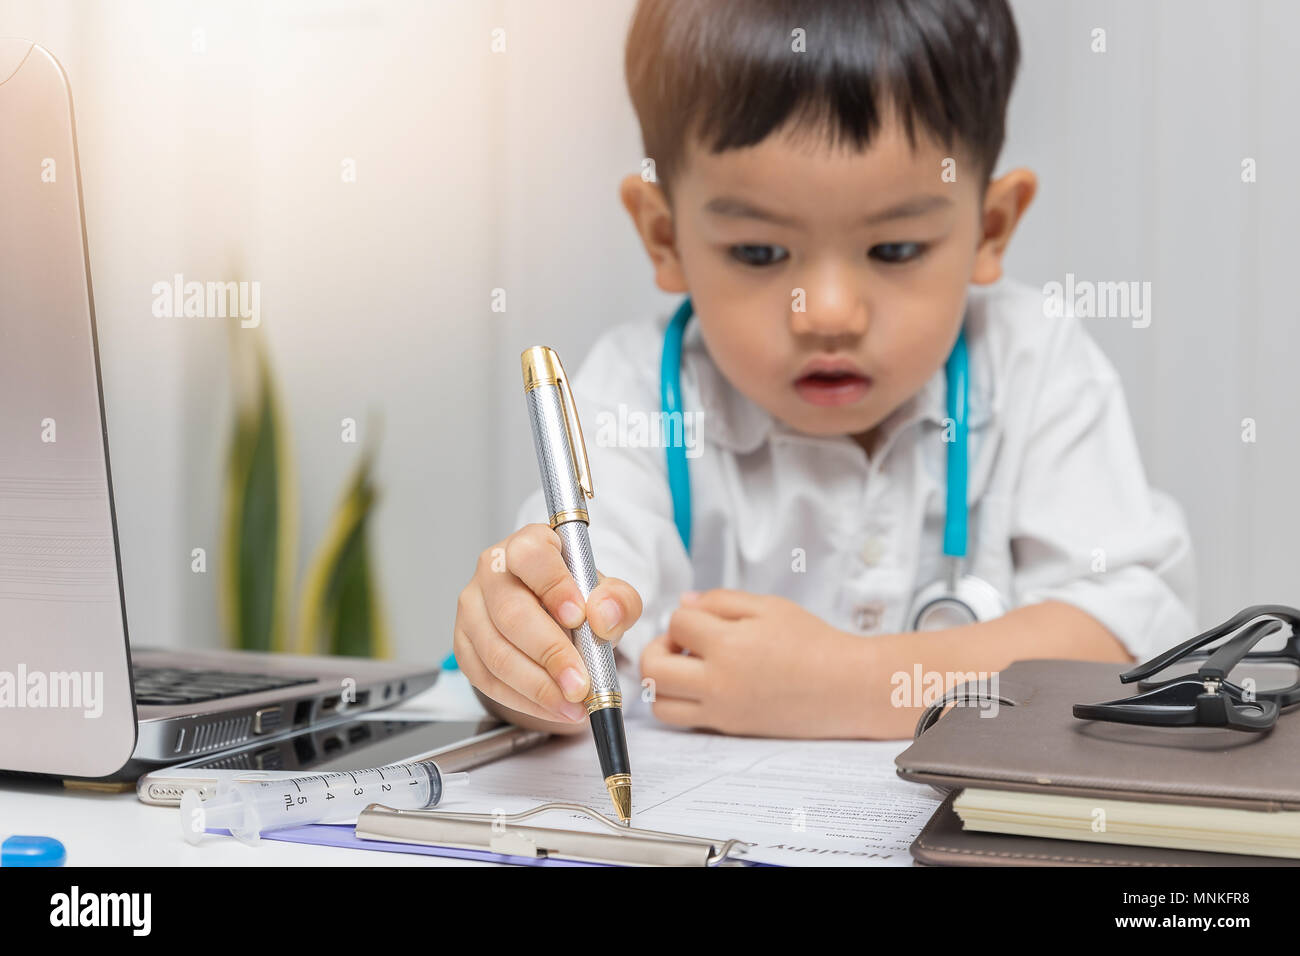 Young asian boy playing doctor and writing on diagnostic chart. Stock Photo